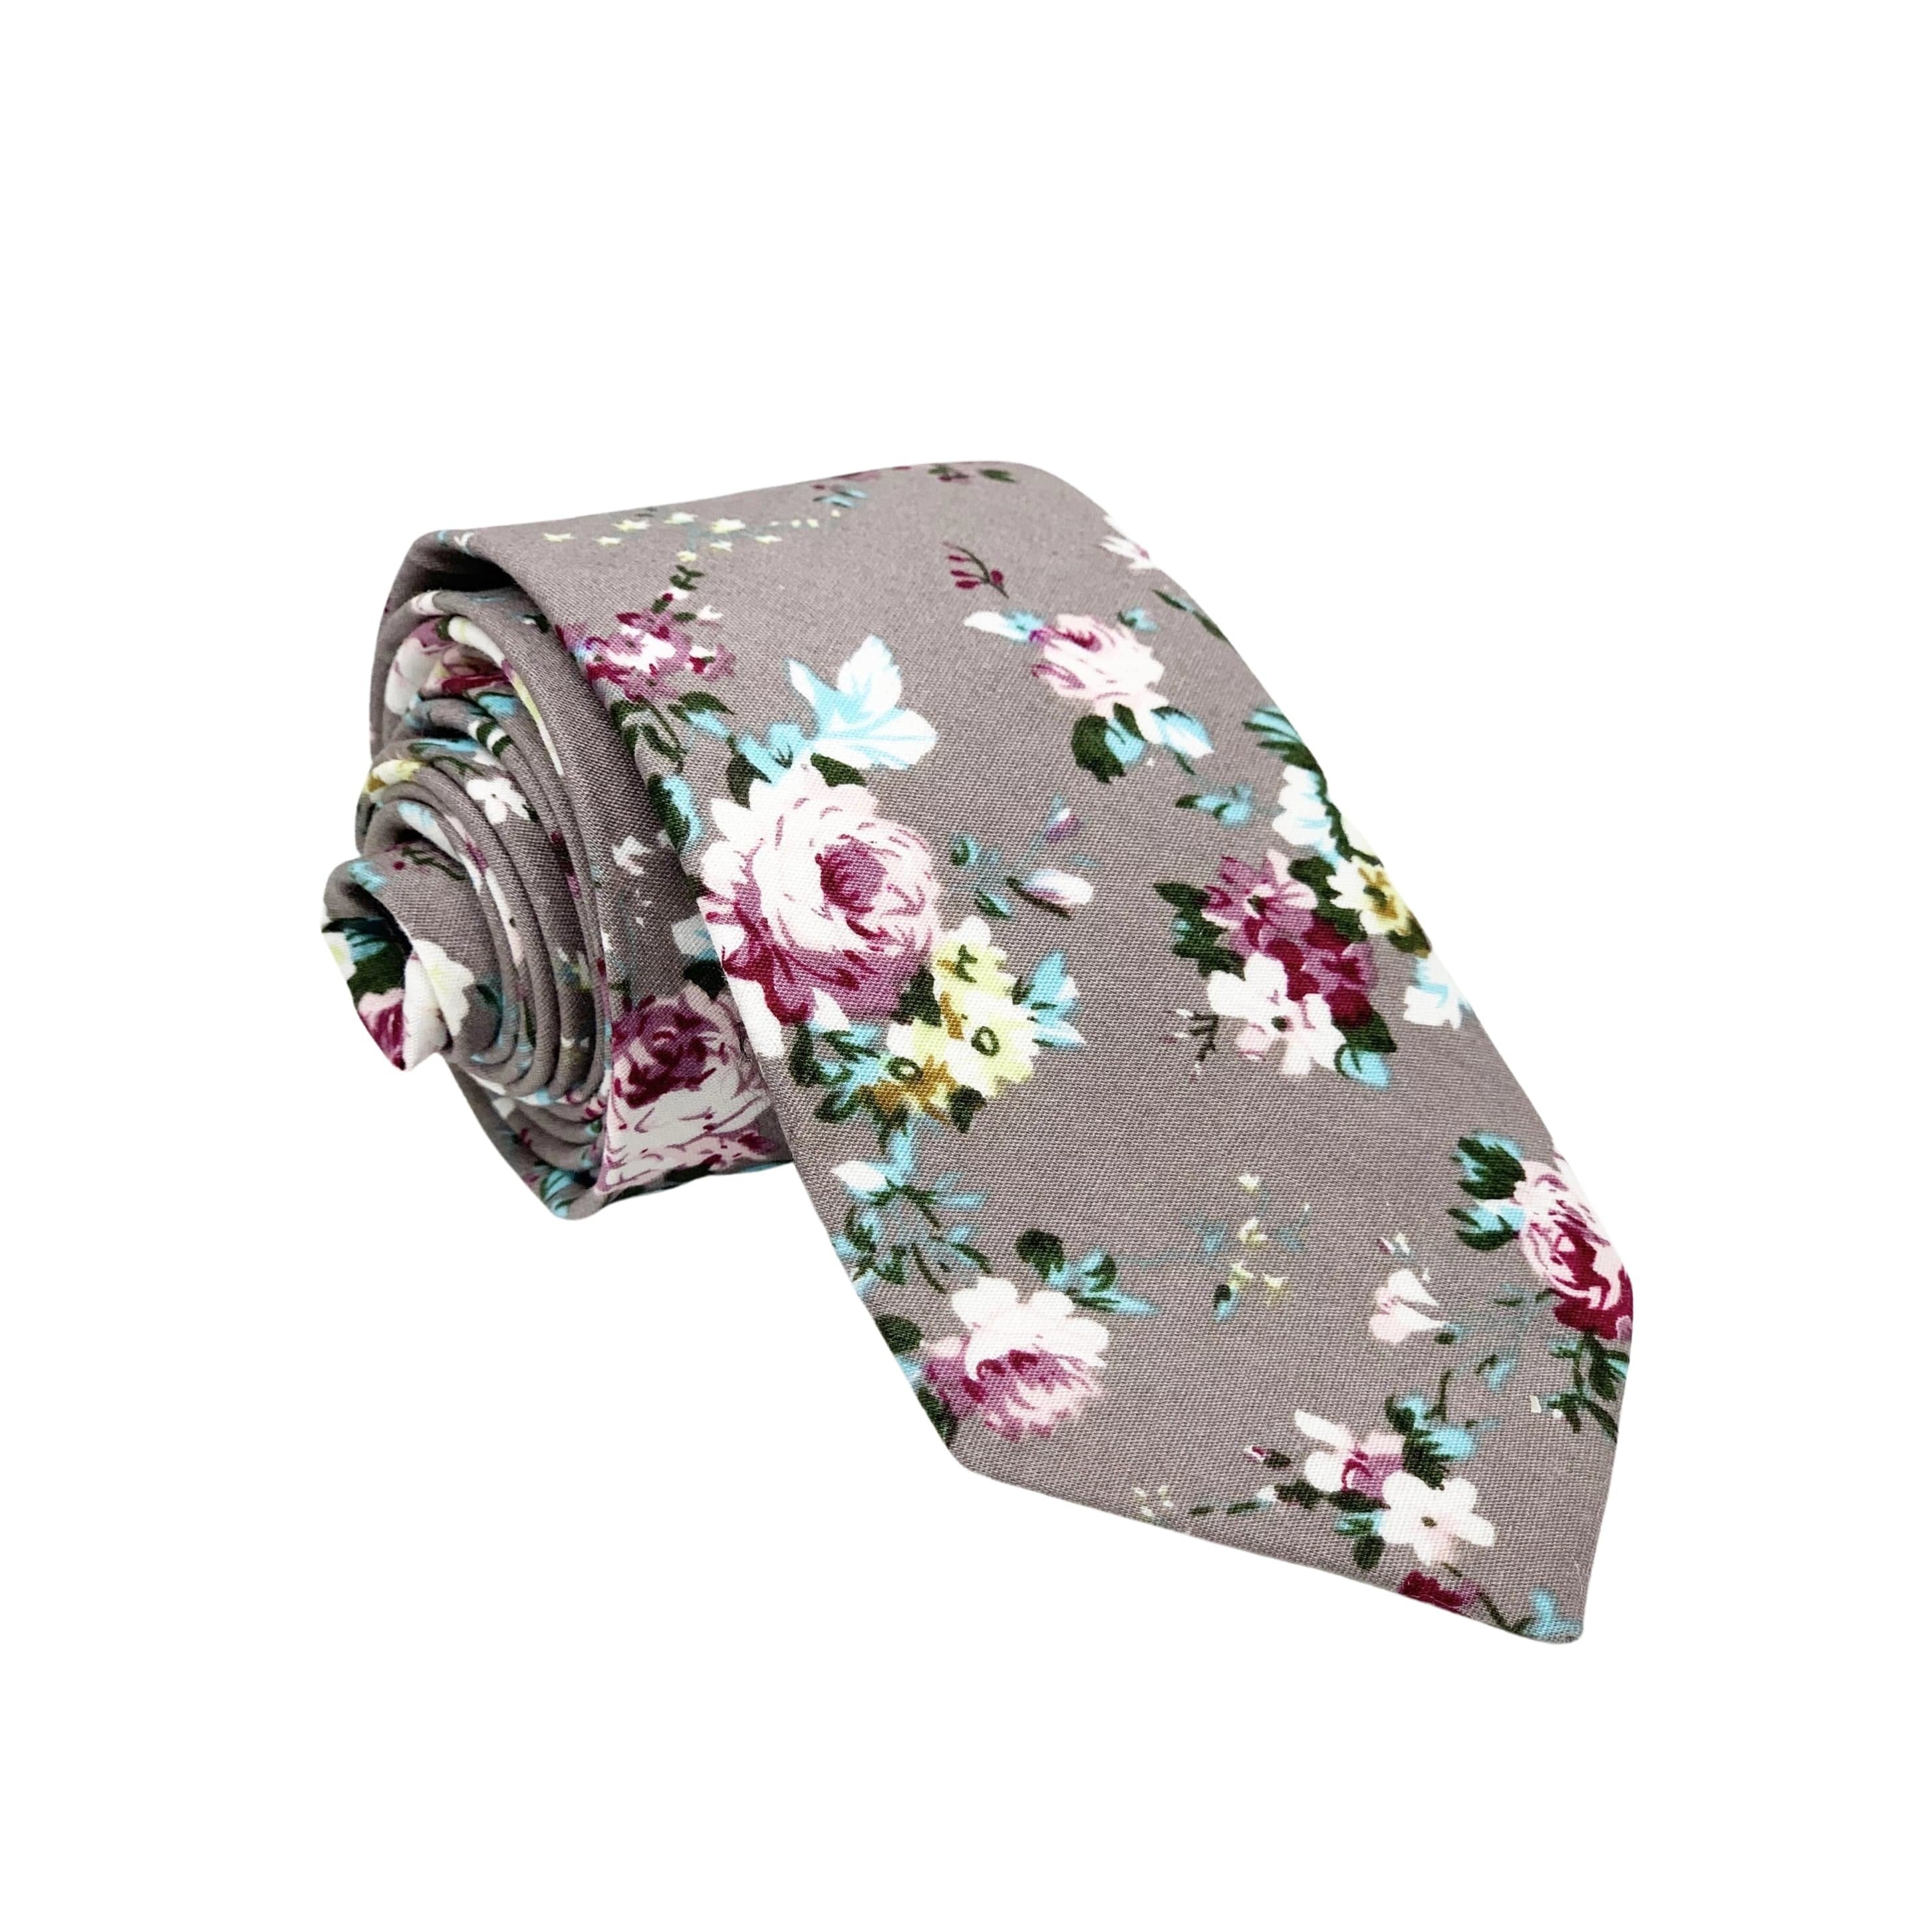 Gray Floral Tie 2.36&quot; SANDY - MYTIESHOP-Neckties-Gray Floral Tie Men’s Floral floral pocket squares for weddings and events, great for prom and anniversary gifts. Mens floral handkerchief near me us-Mytieshop. Skinny ties for weddings anniversaries. Father of bride. Groomsmen. Cool skinny neckties for men. Neckwear for prom, missions and fancy events. Gift ideas for men. Anniversaries ideas. Wedding aesthetics. Flower ties. Dry flower ties.